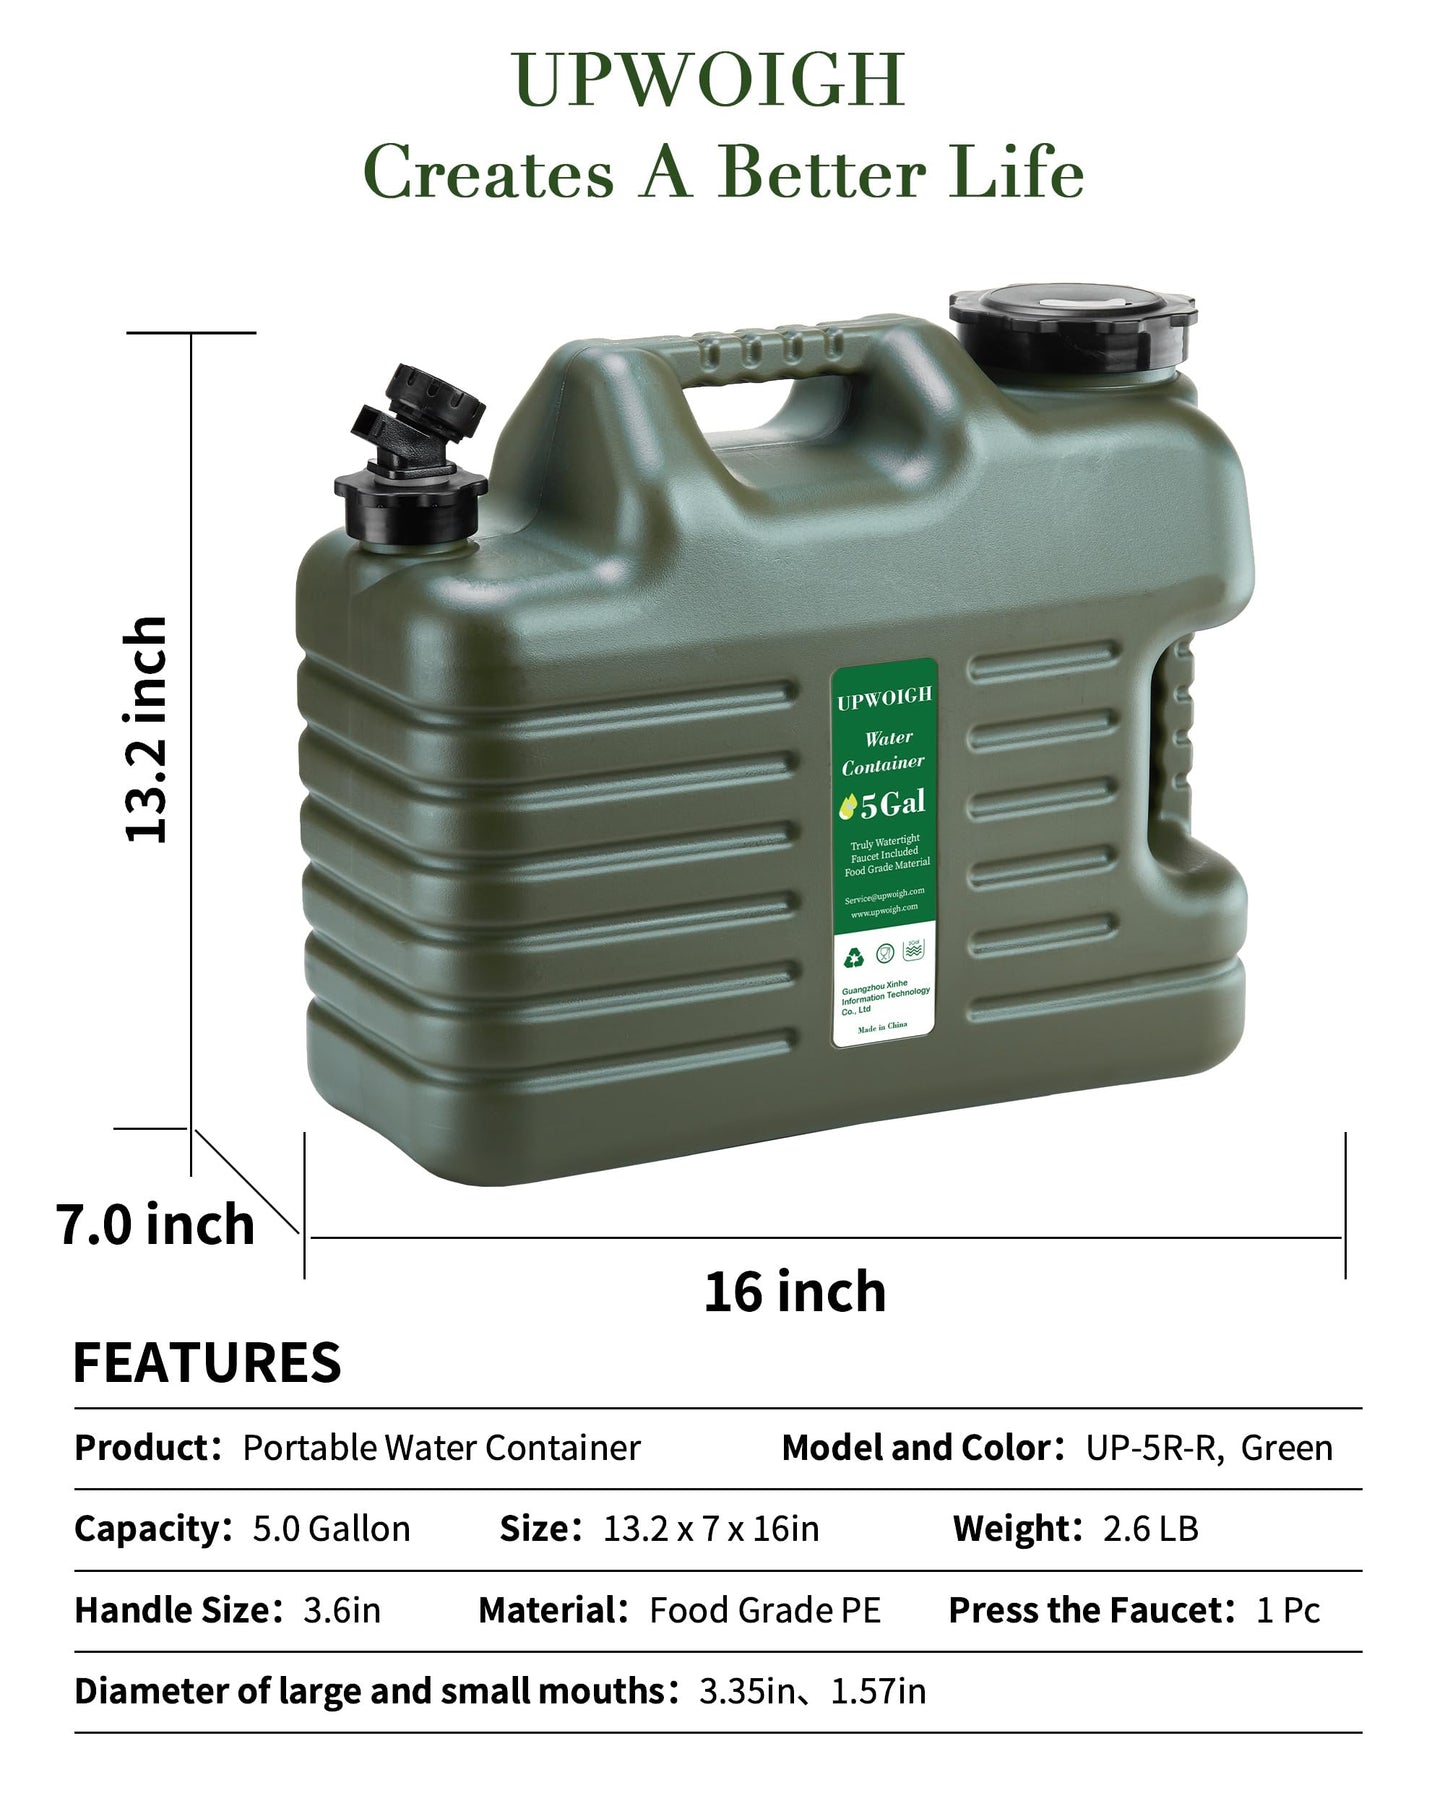 UPWOIGH 5 Gallon Water Jug, Camping Water Container, Truly No Leakage Water Storage, Large Military Green Water Tank,BPA Free Portable Emergency Overlanding Gear for Outdoors Hiking